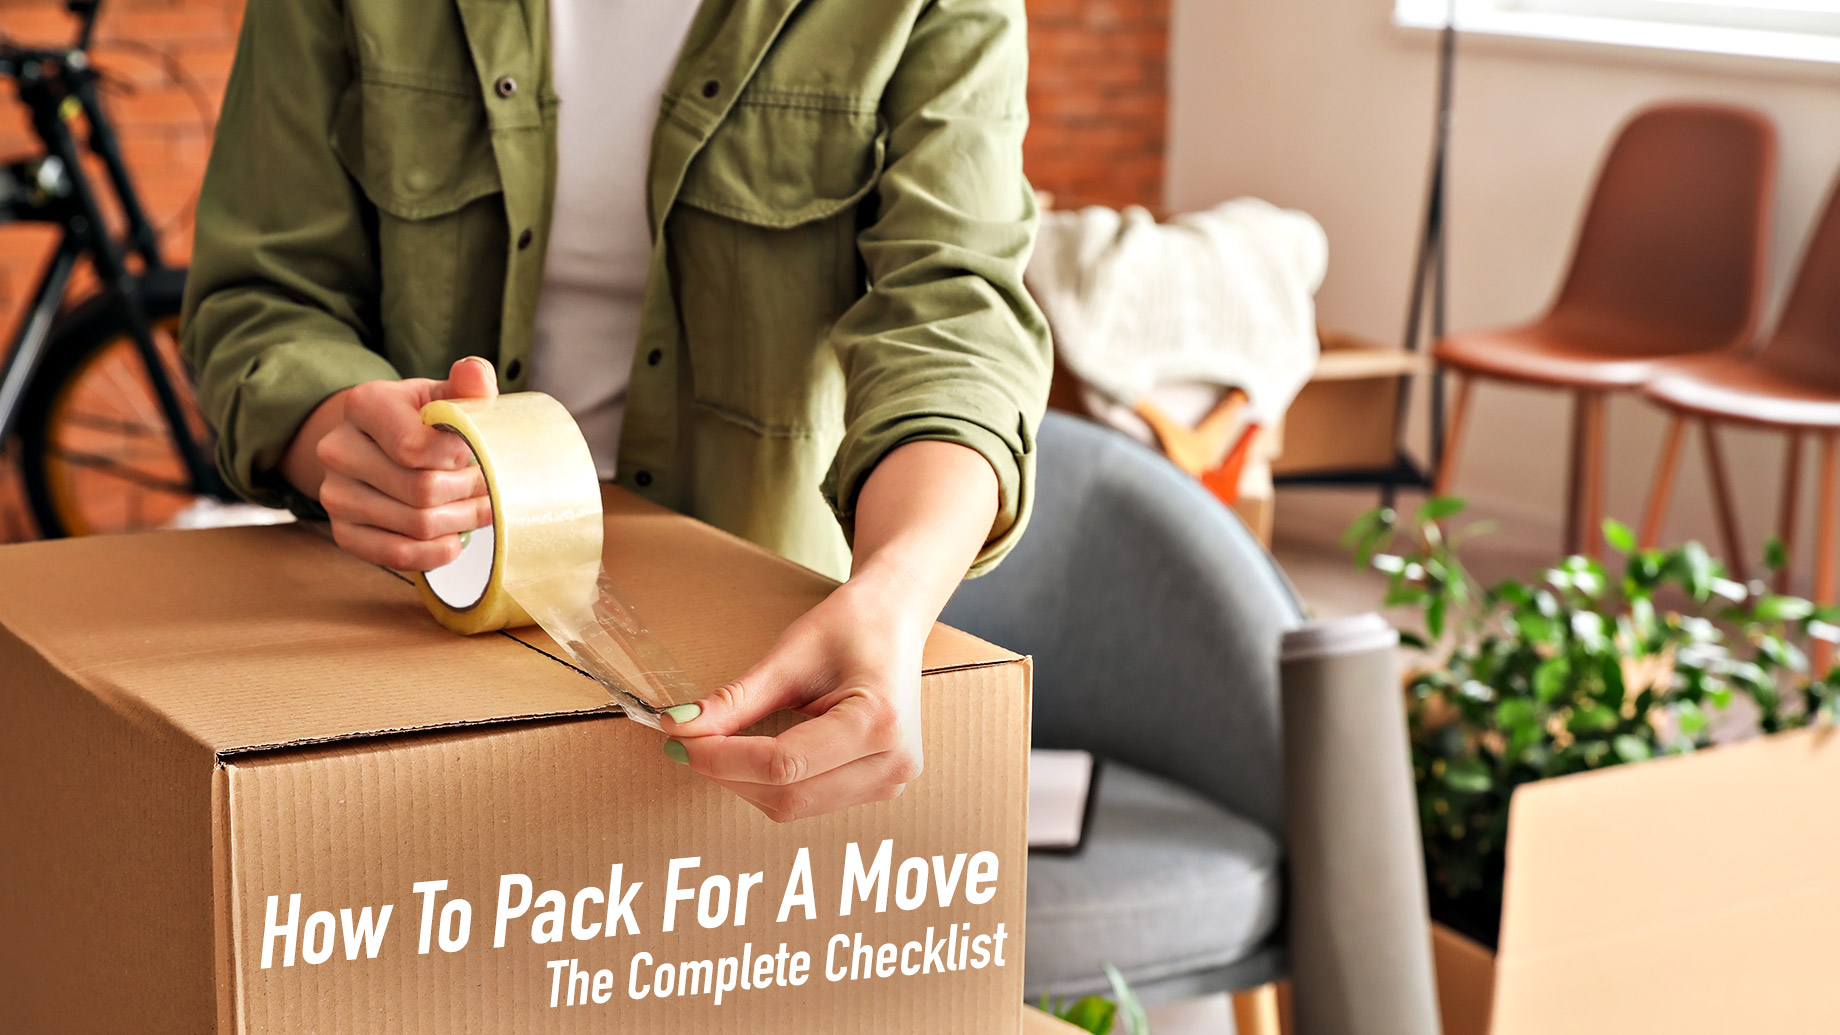 How To Pack For A Move - The Complete Checklist